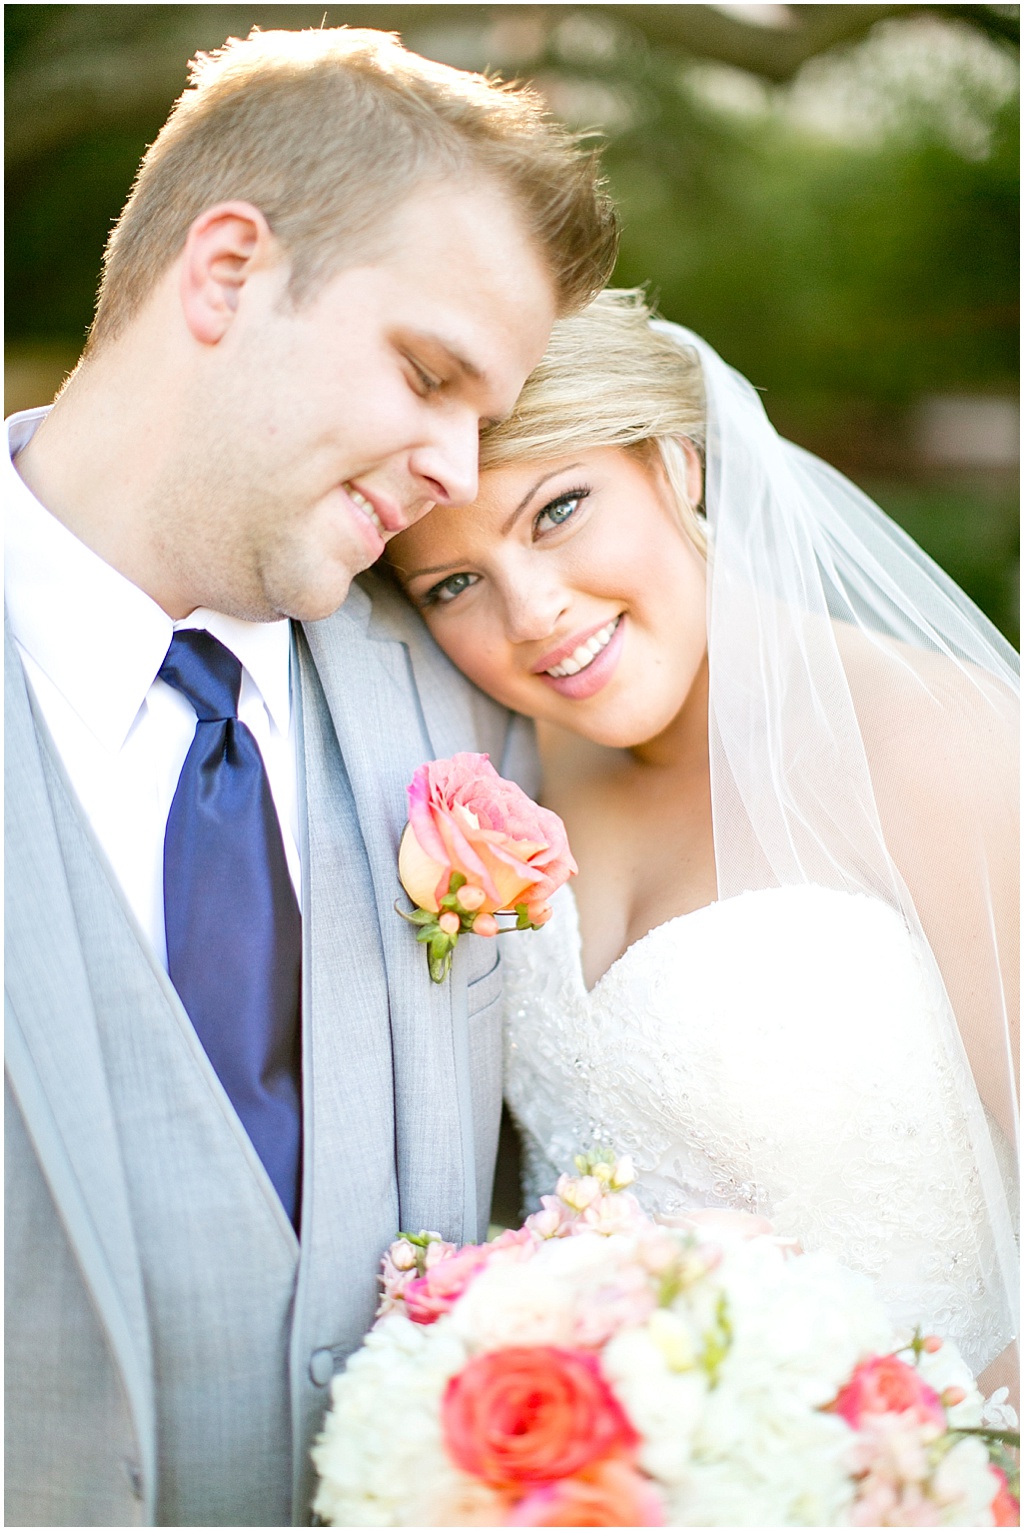 View More: http://maryfieldsphotography.pass.us/lee-wedding-8-8-15